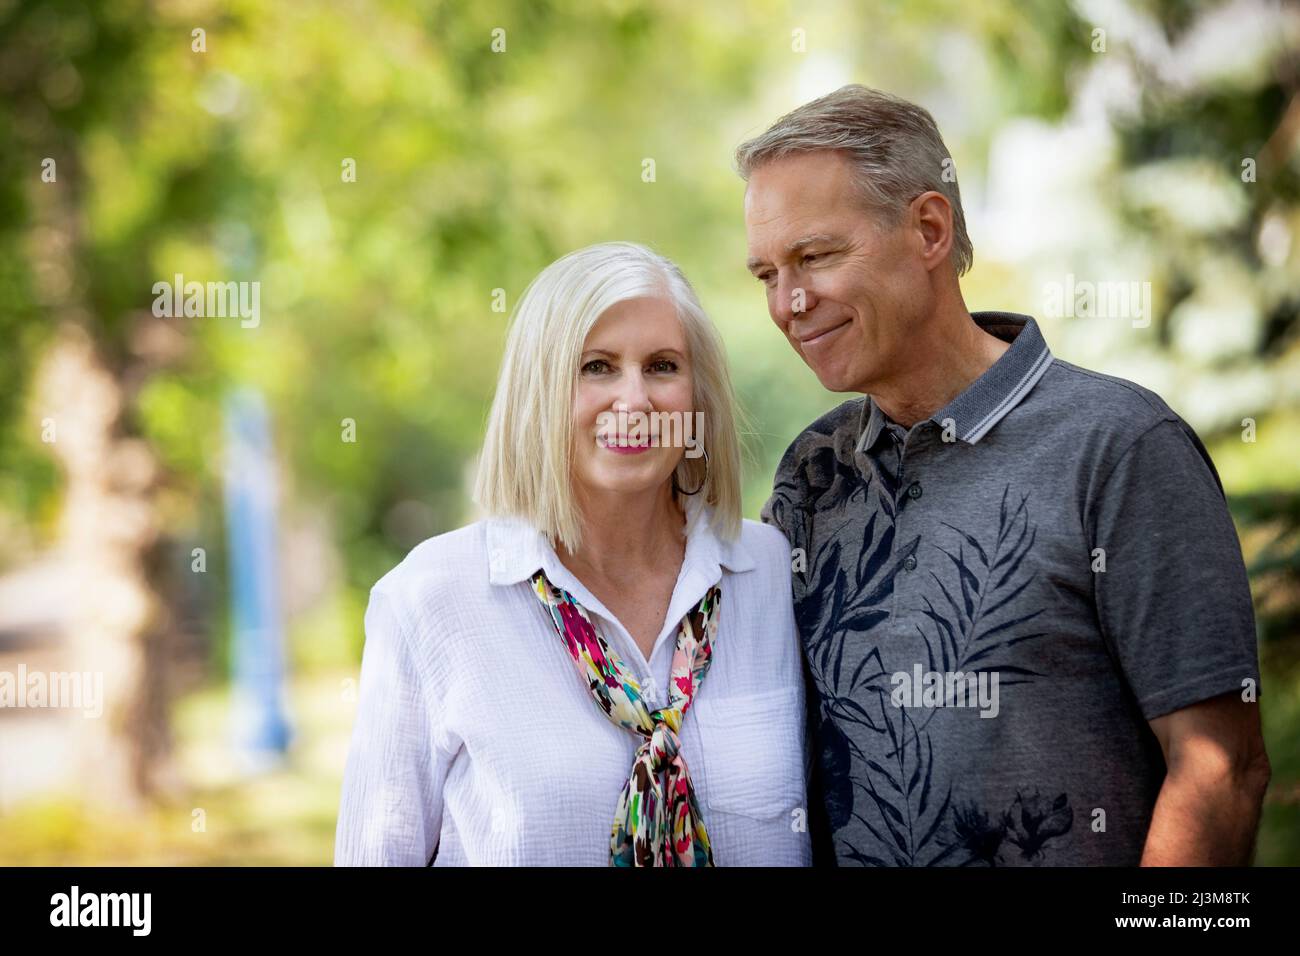 Outdoor portrait of a mature couple in a park, the husband looking at the wife; Edmonton, Alberta, Canada Stock Photo